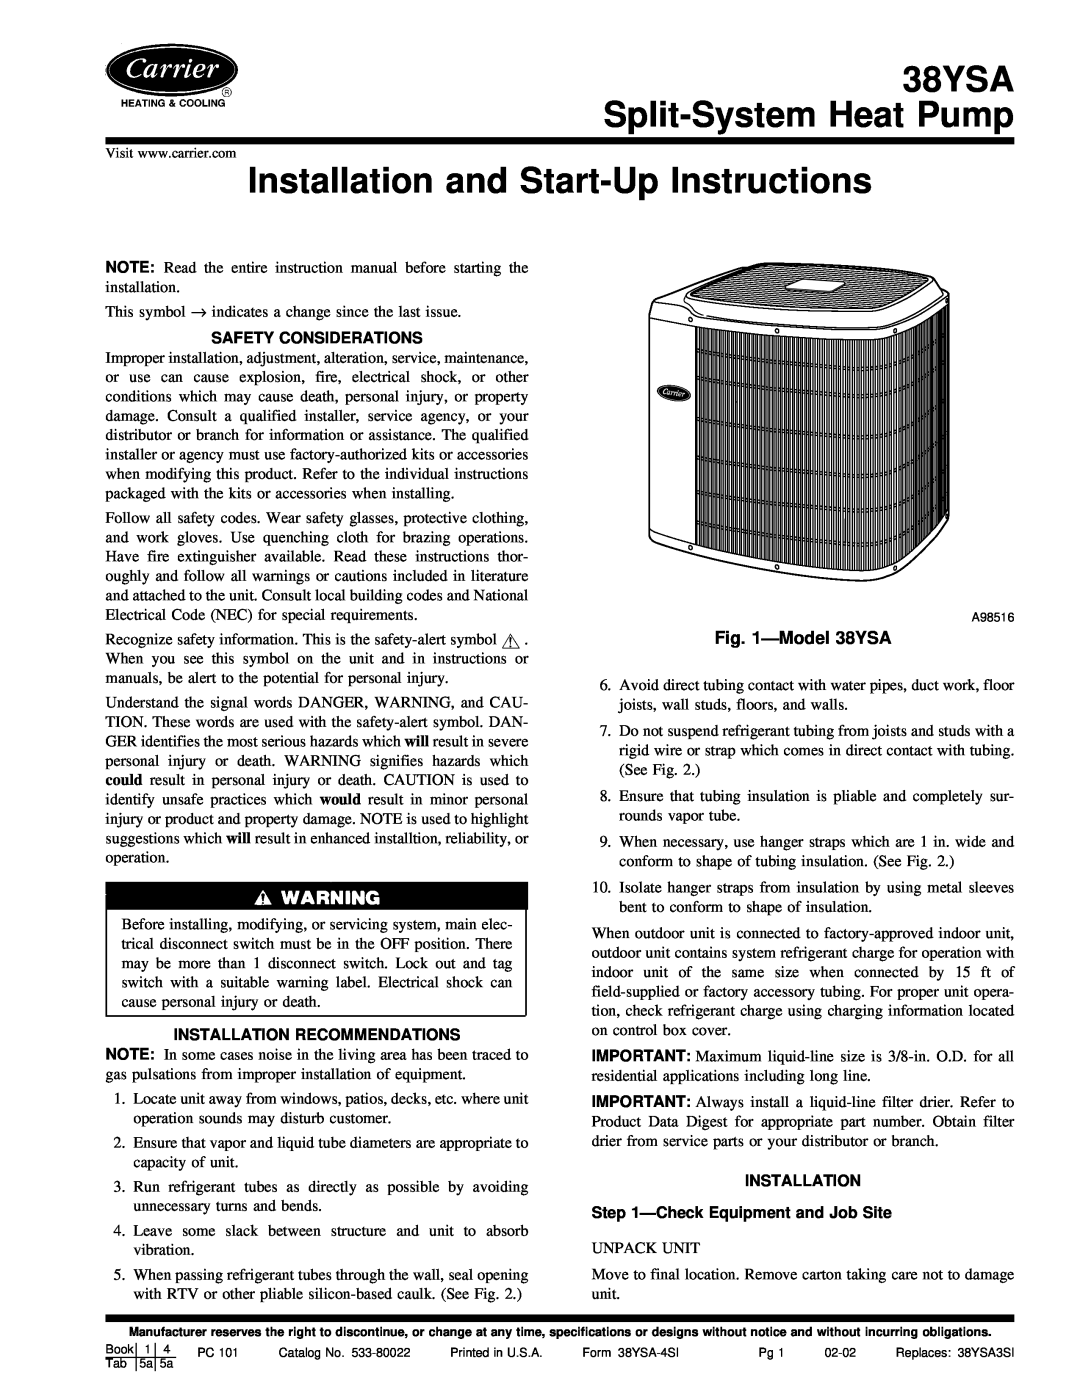 Carrier instruction manual Installation and Start-UpInstructions, 38YSA Split-SystemHeat Pump, Safety Considerations 